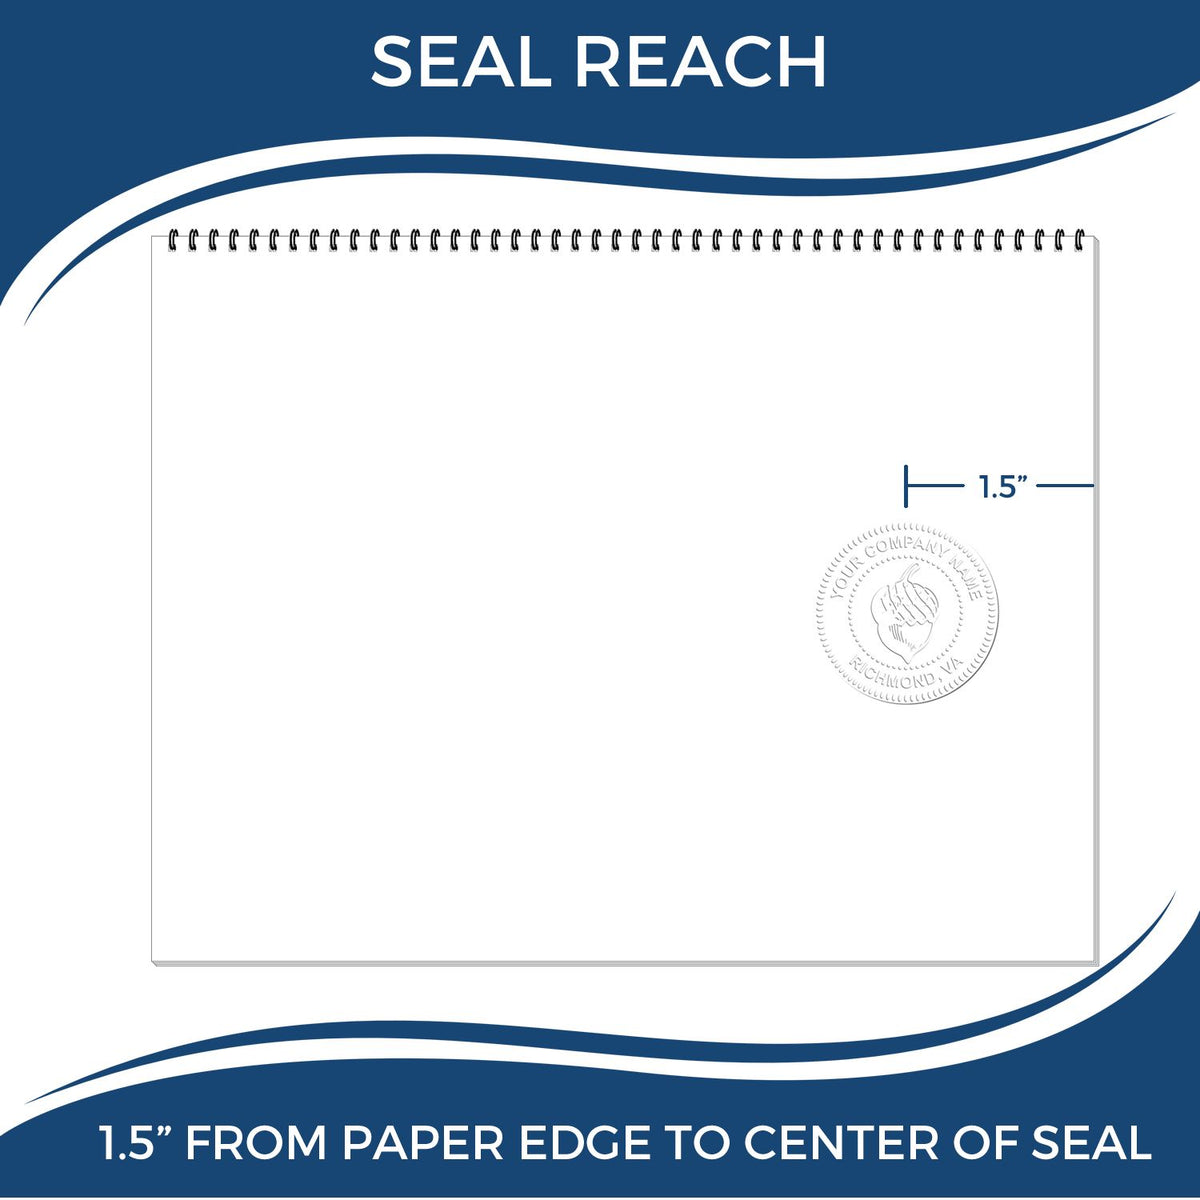 An infographic showing the seal reach which is represented by a ruler and a miniature seal image of the Maryland Desk Surveyor Seal Embosser